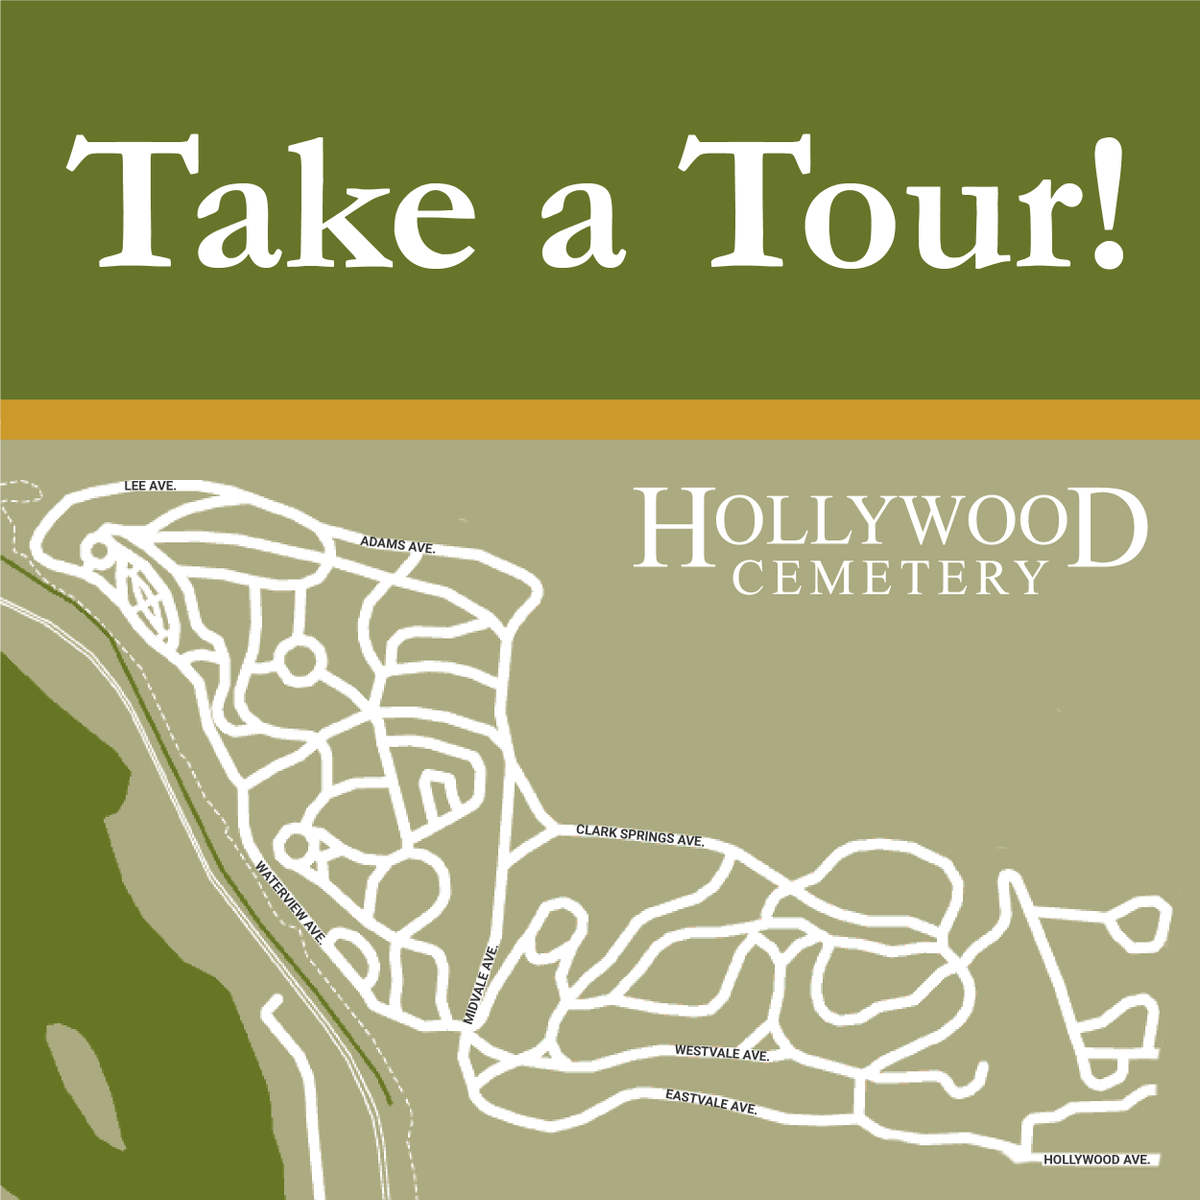 Visitors are welcome to take a self-guided tour through Hollywood Cemetery in their car or on foot. You can pick up a map in the cemetery office. This is a great opportunity to take our Natural Treasure Guides along with you! hollywoodcemetery.org/visit/natural-…